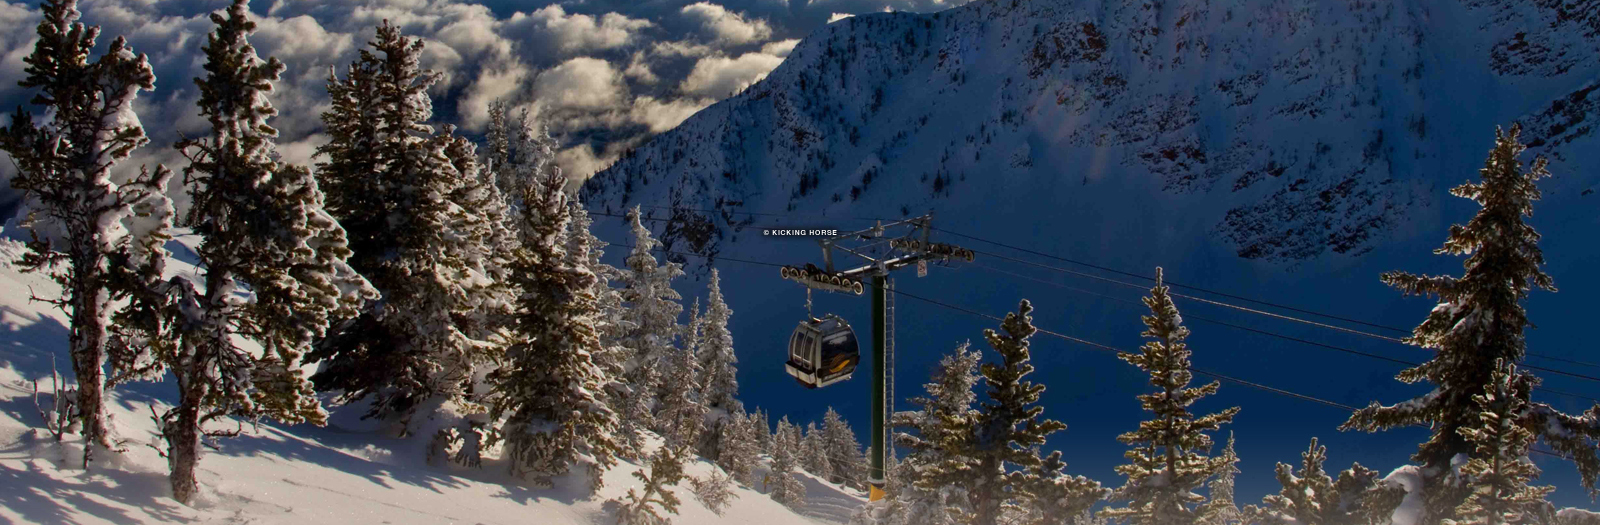 Discounted Kicking Horse Lift Tickets & Passes